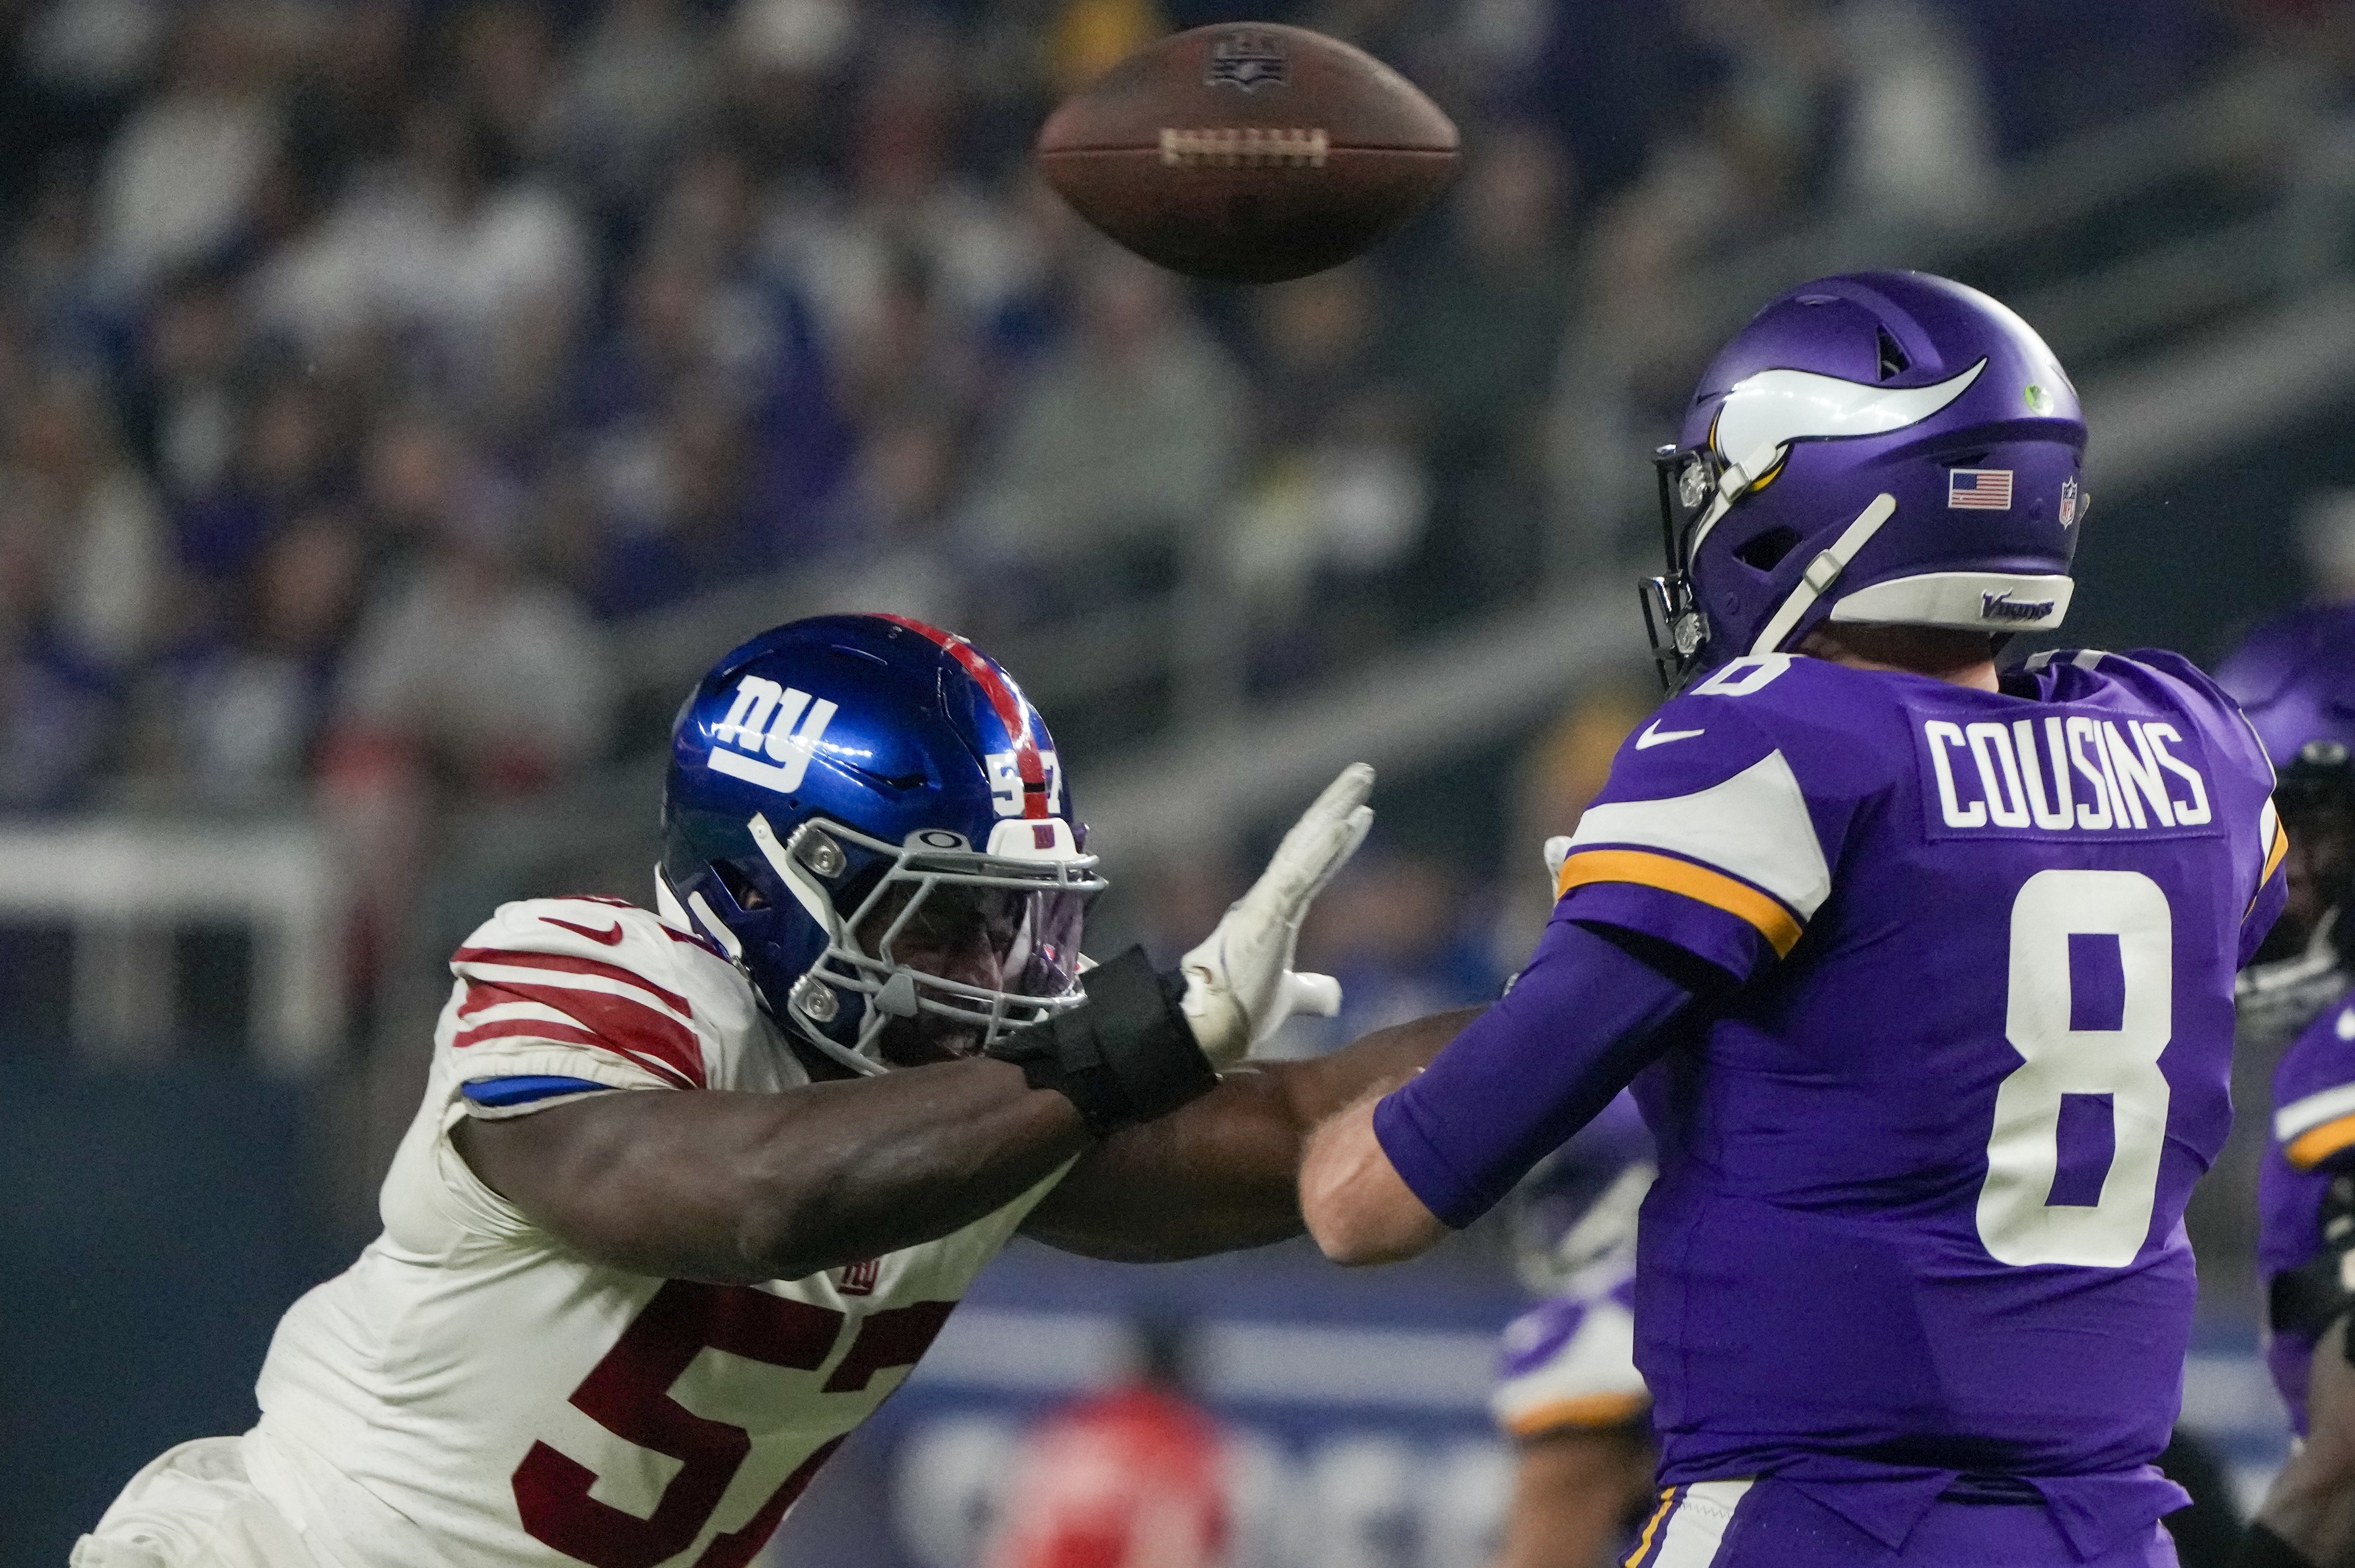 Minnesota Vikings LOSE to New York Giants in NFL Wild Card round 